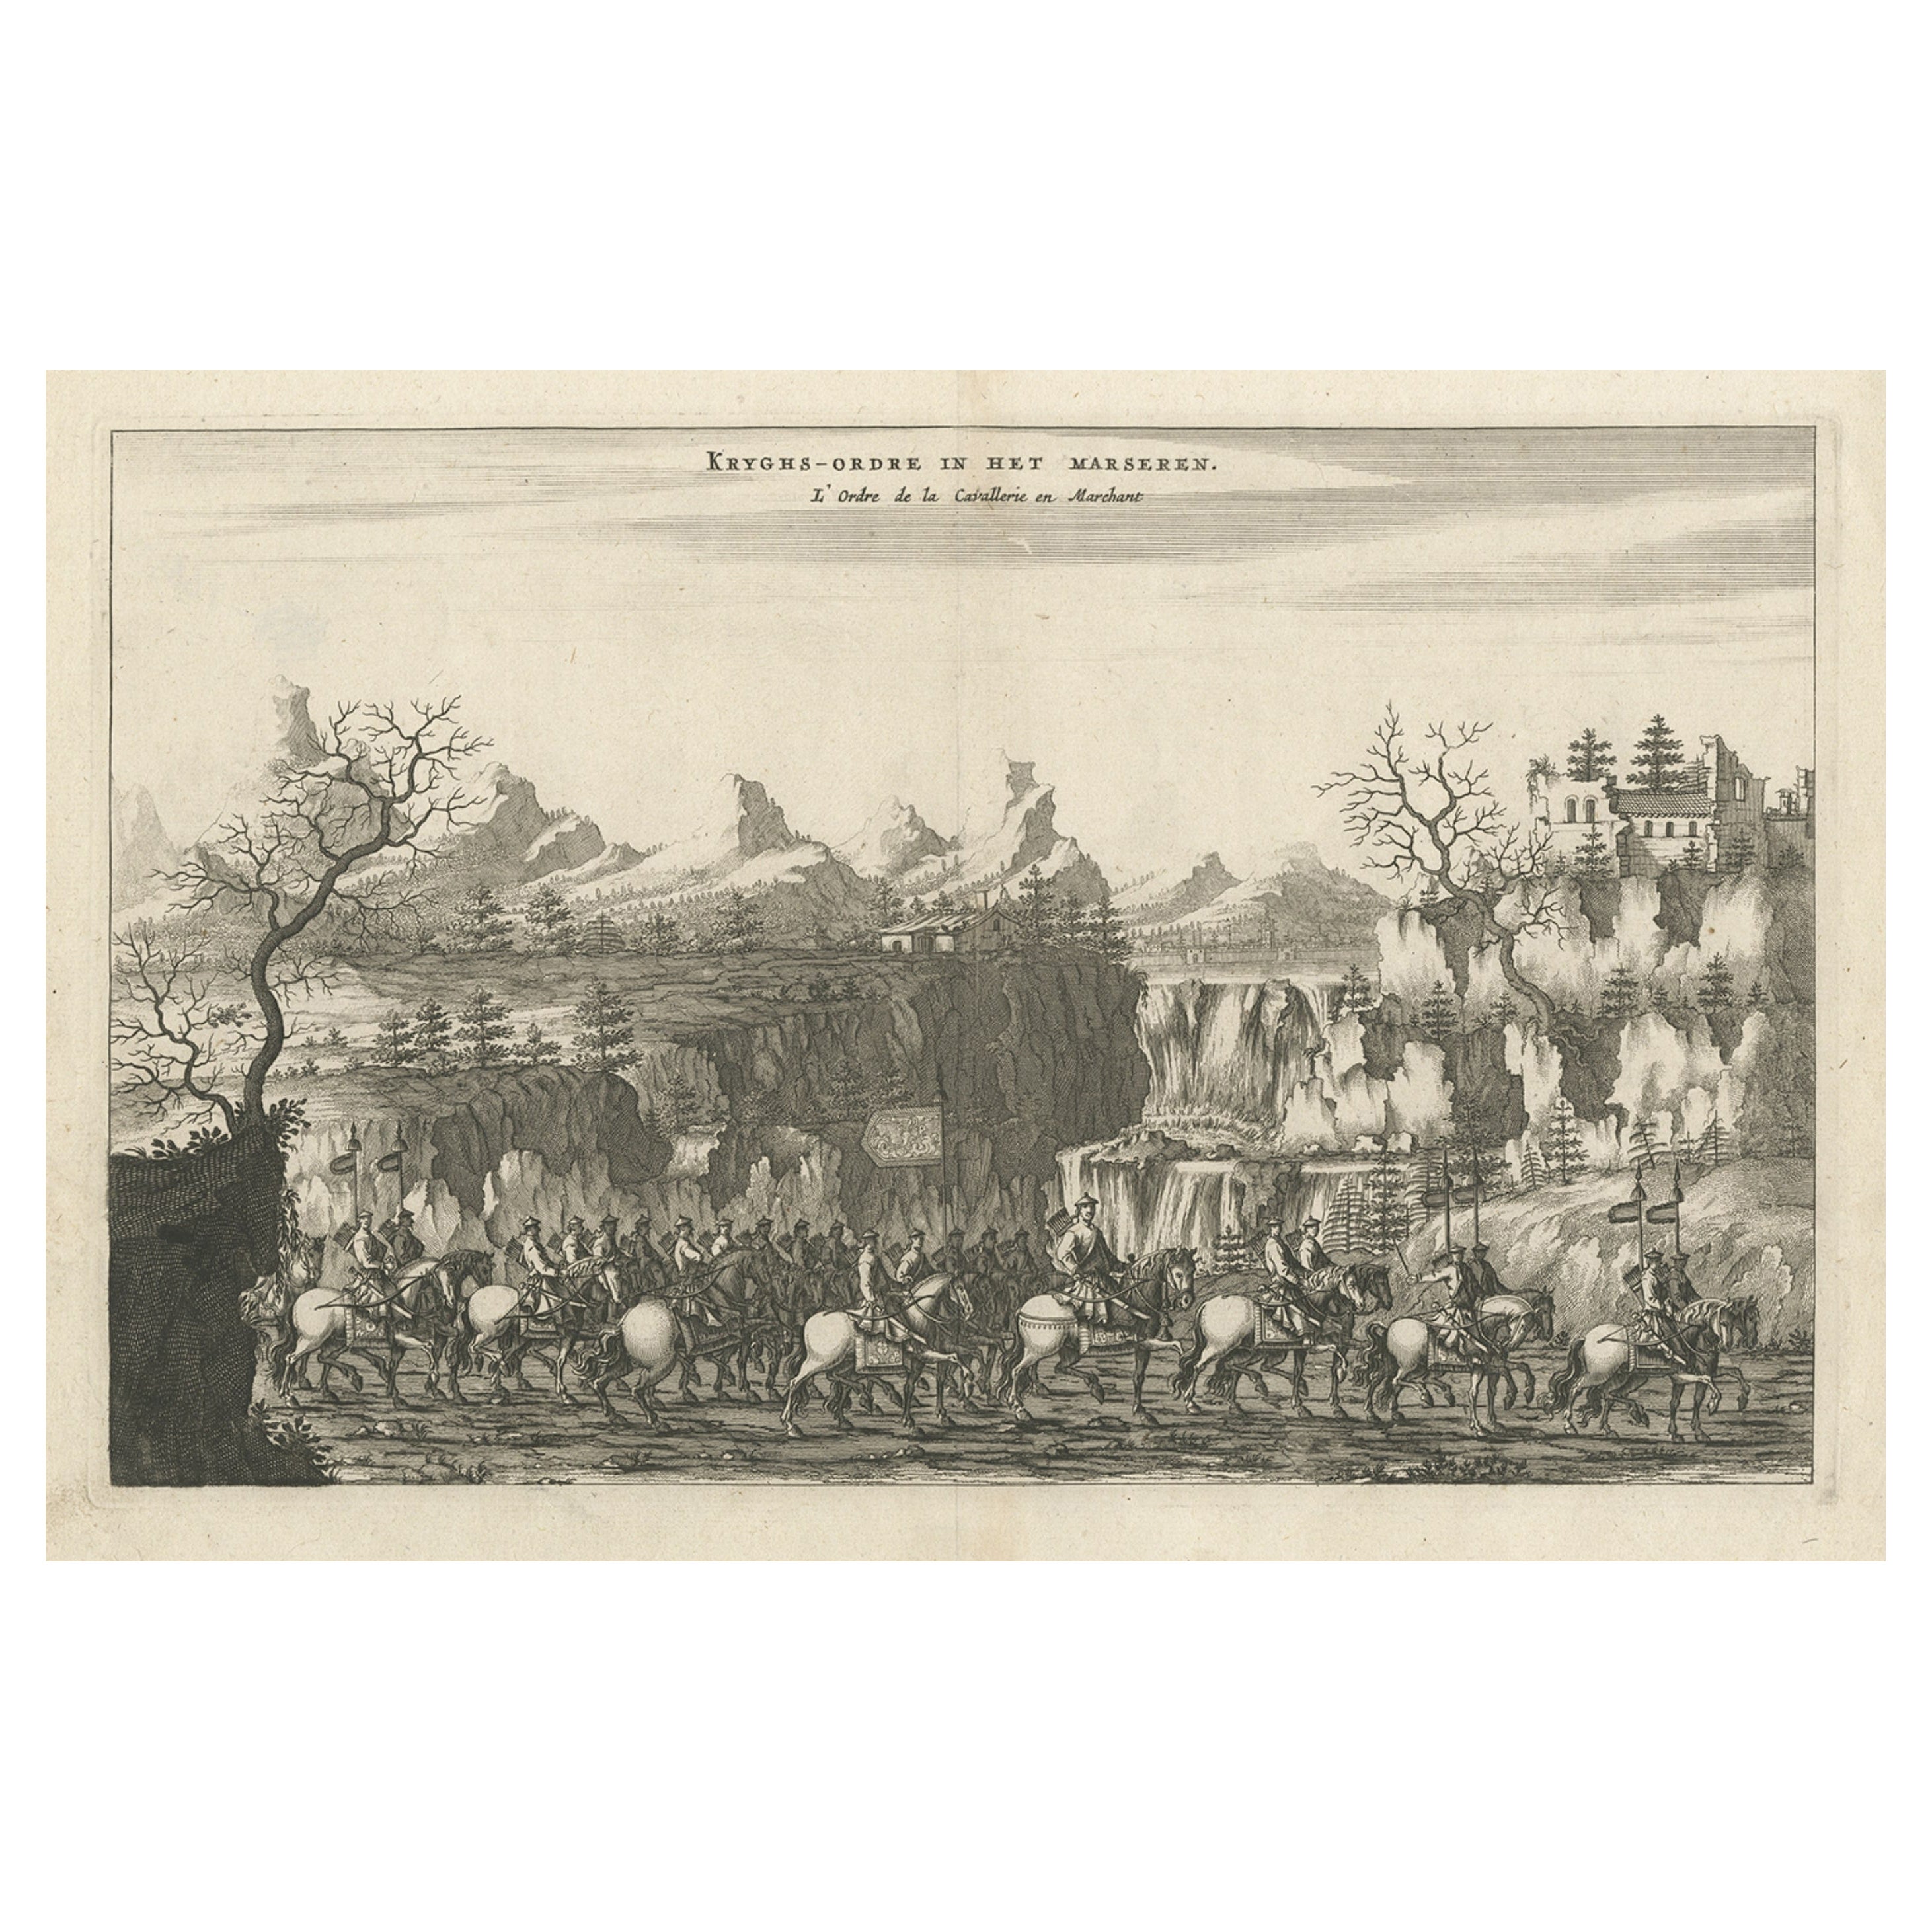 Decorative Original Antique Print Depicting the Cavalry Marching in China, 1665